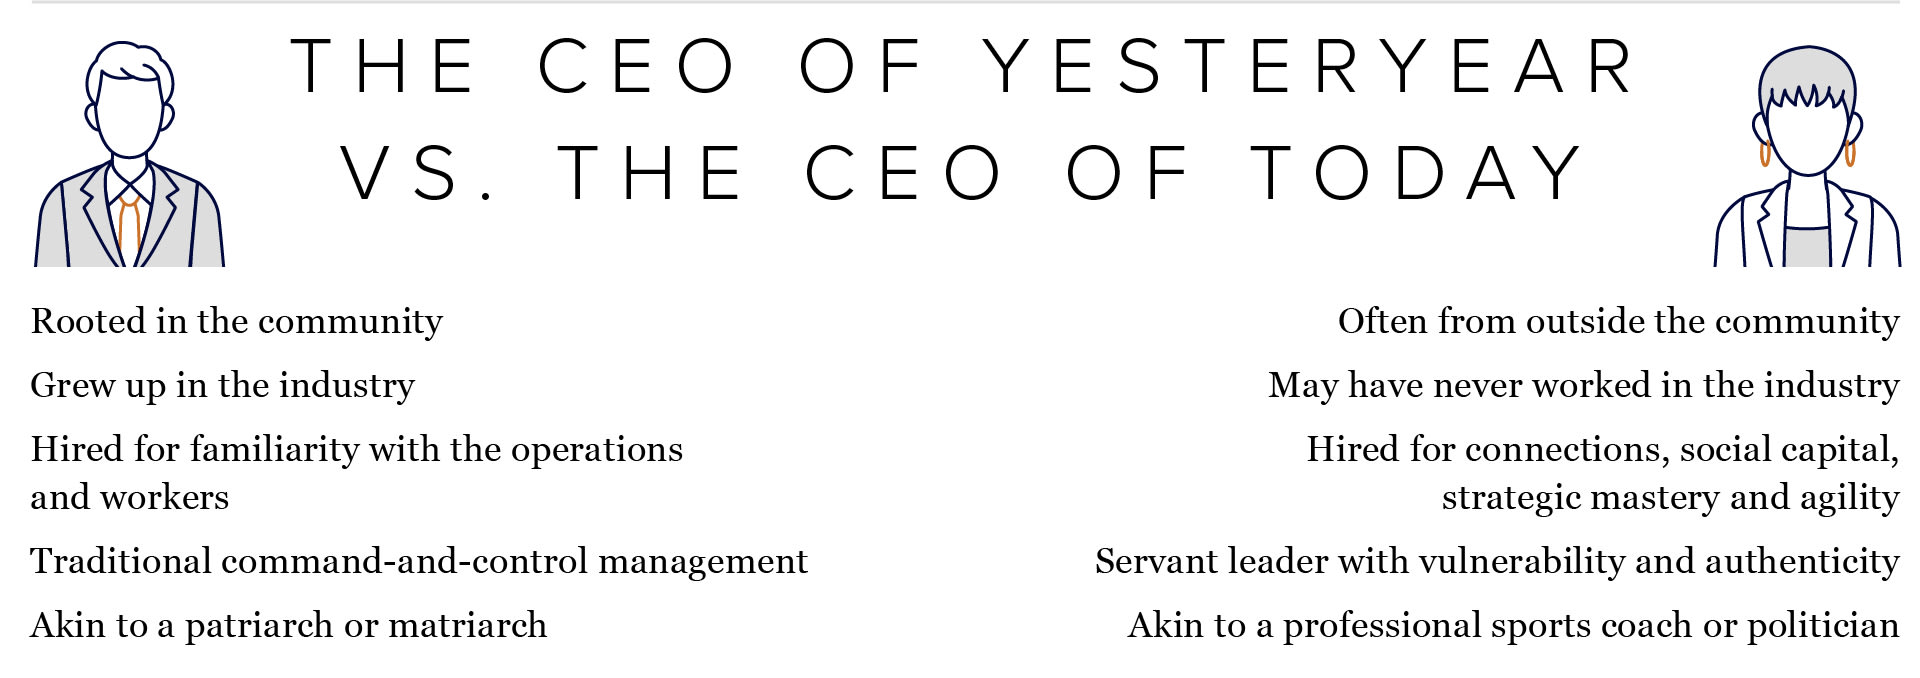 The CEO of Yesteryear vs. the CEO of Today